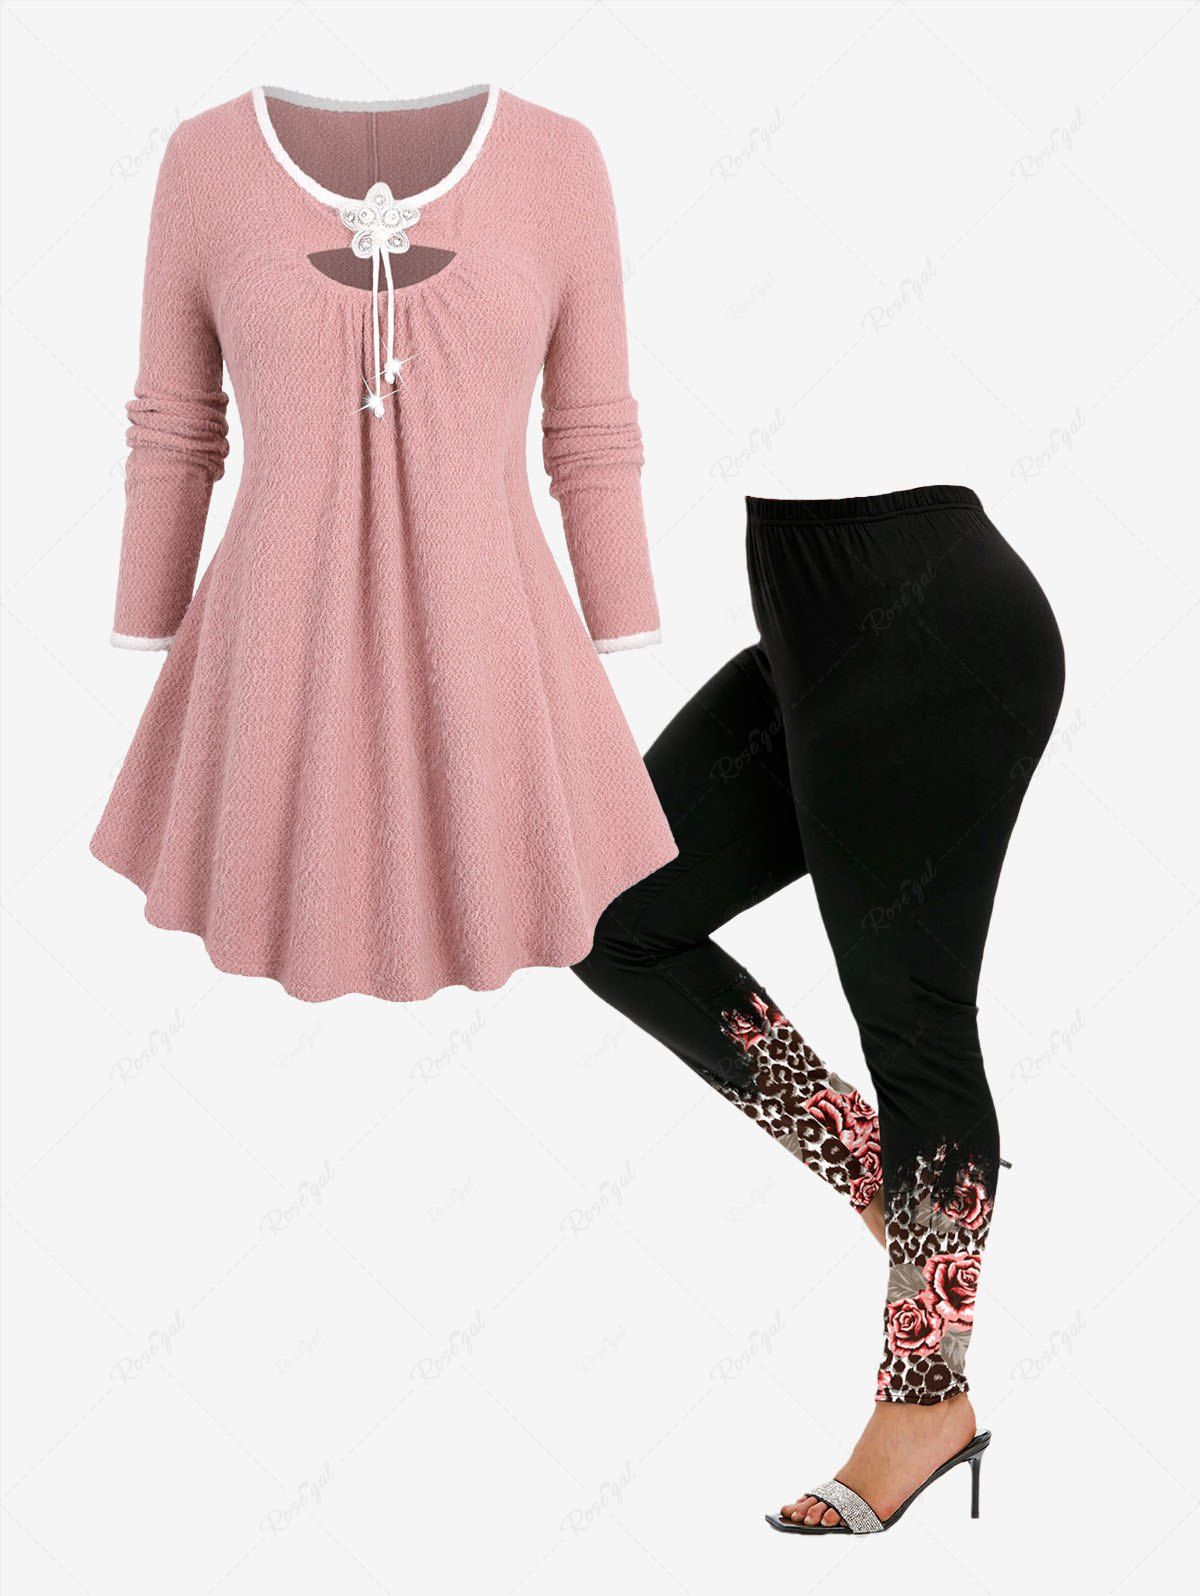 Latest Glitter Sparkling Floral Buckle Cut Out Panel Contrast Binding Long Sleeves Fluffy Pullover Knit Sweater and Floral Leaf Colorblock Printed Skinny Leggings Plus Size Outfit  